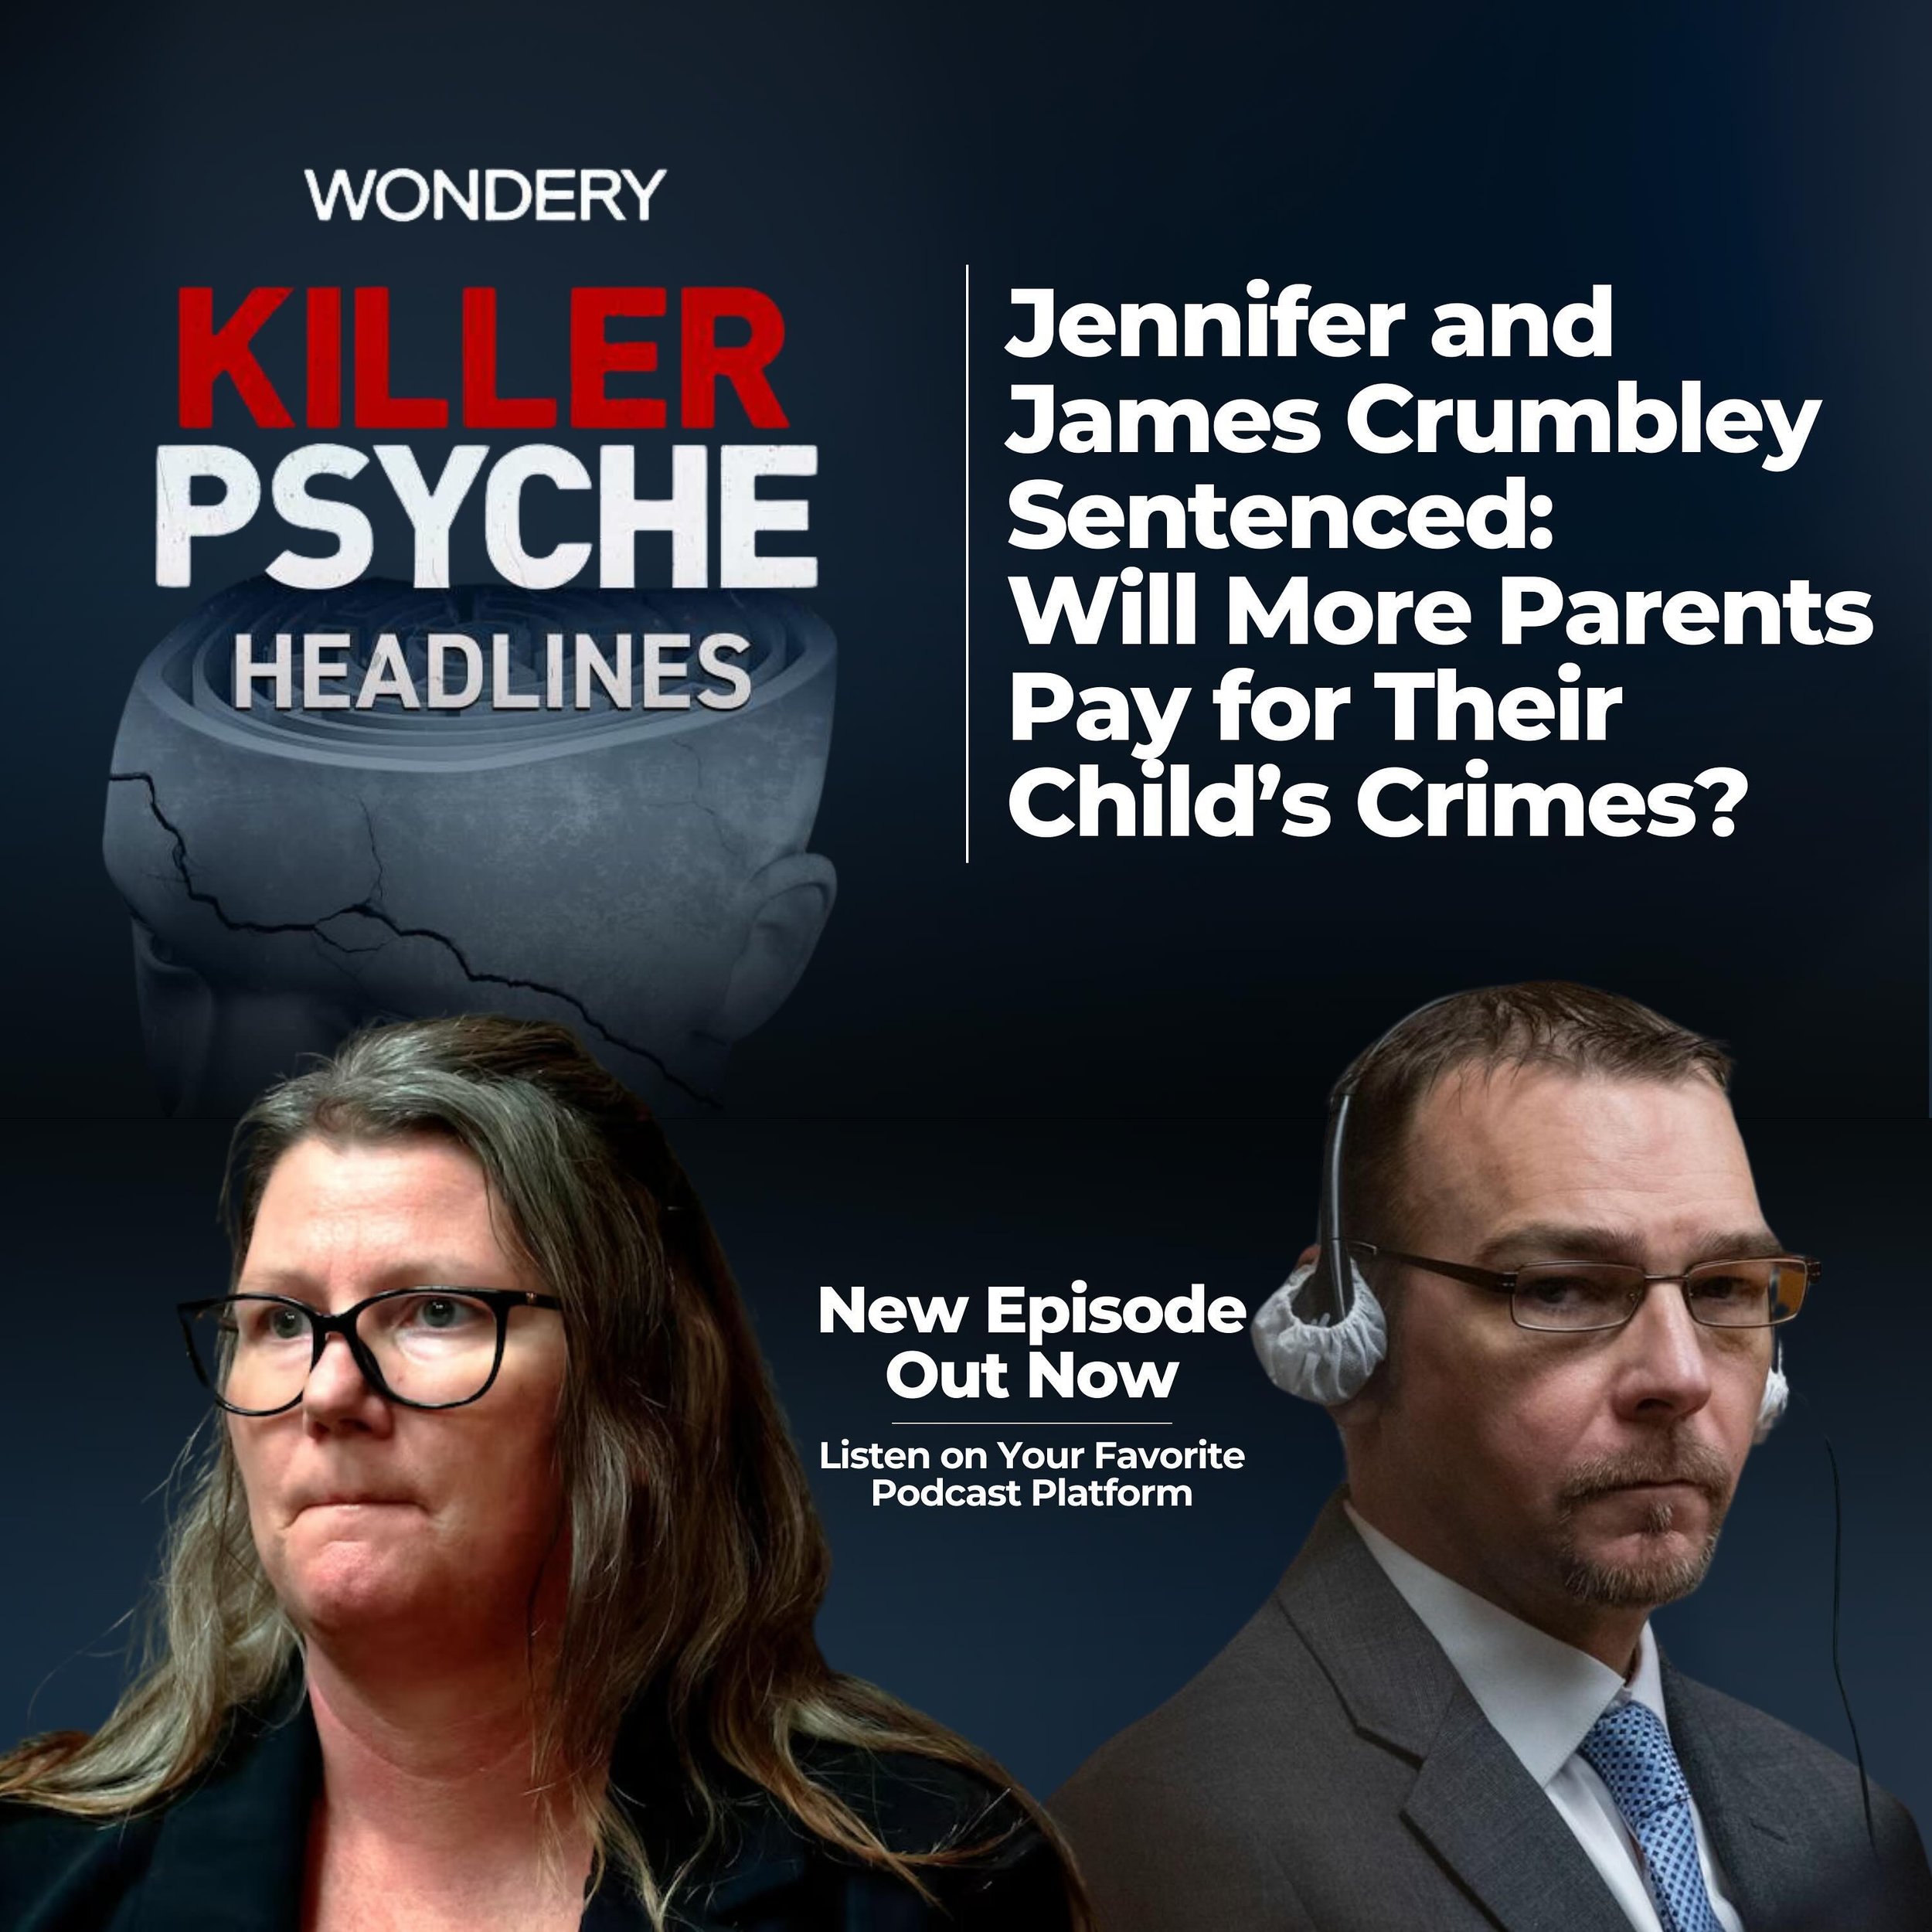 Jennifer and James Crumbley were the first parents in U.S. history to be held criminally responsible for their child&rsquo;s mass school shooting plot. This month&rsquo;s landmark ruling sentenced them both to 10 years in prison. I joined @candicedel